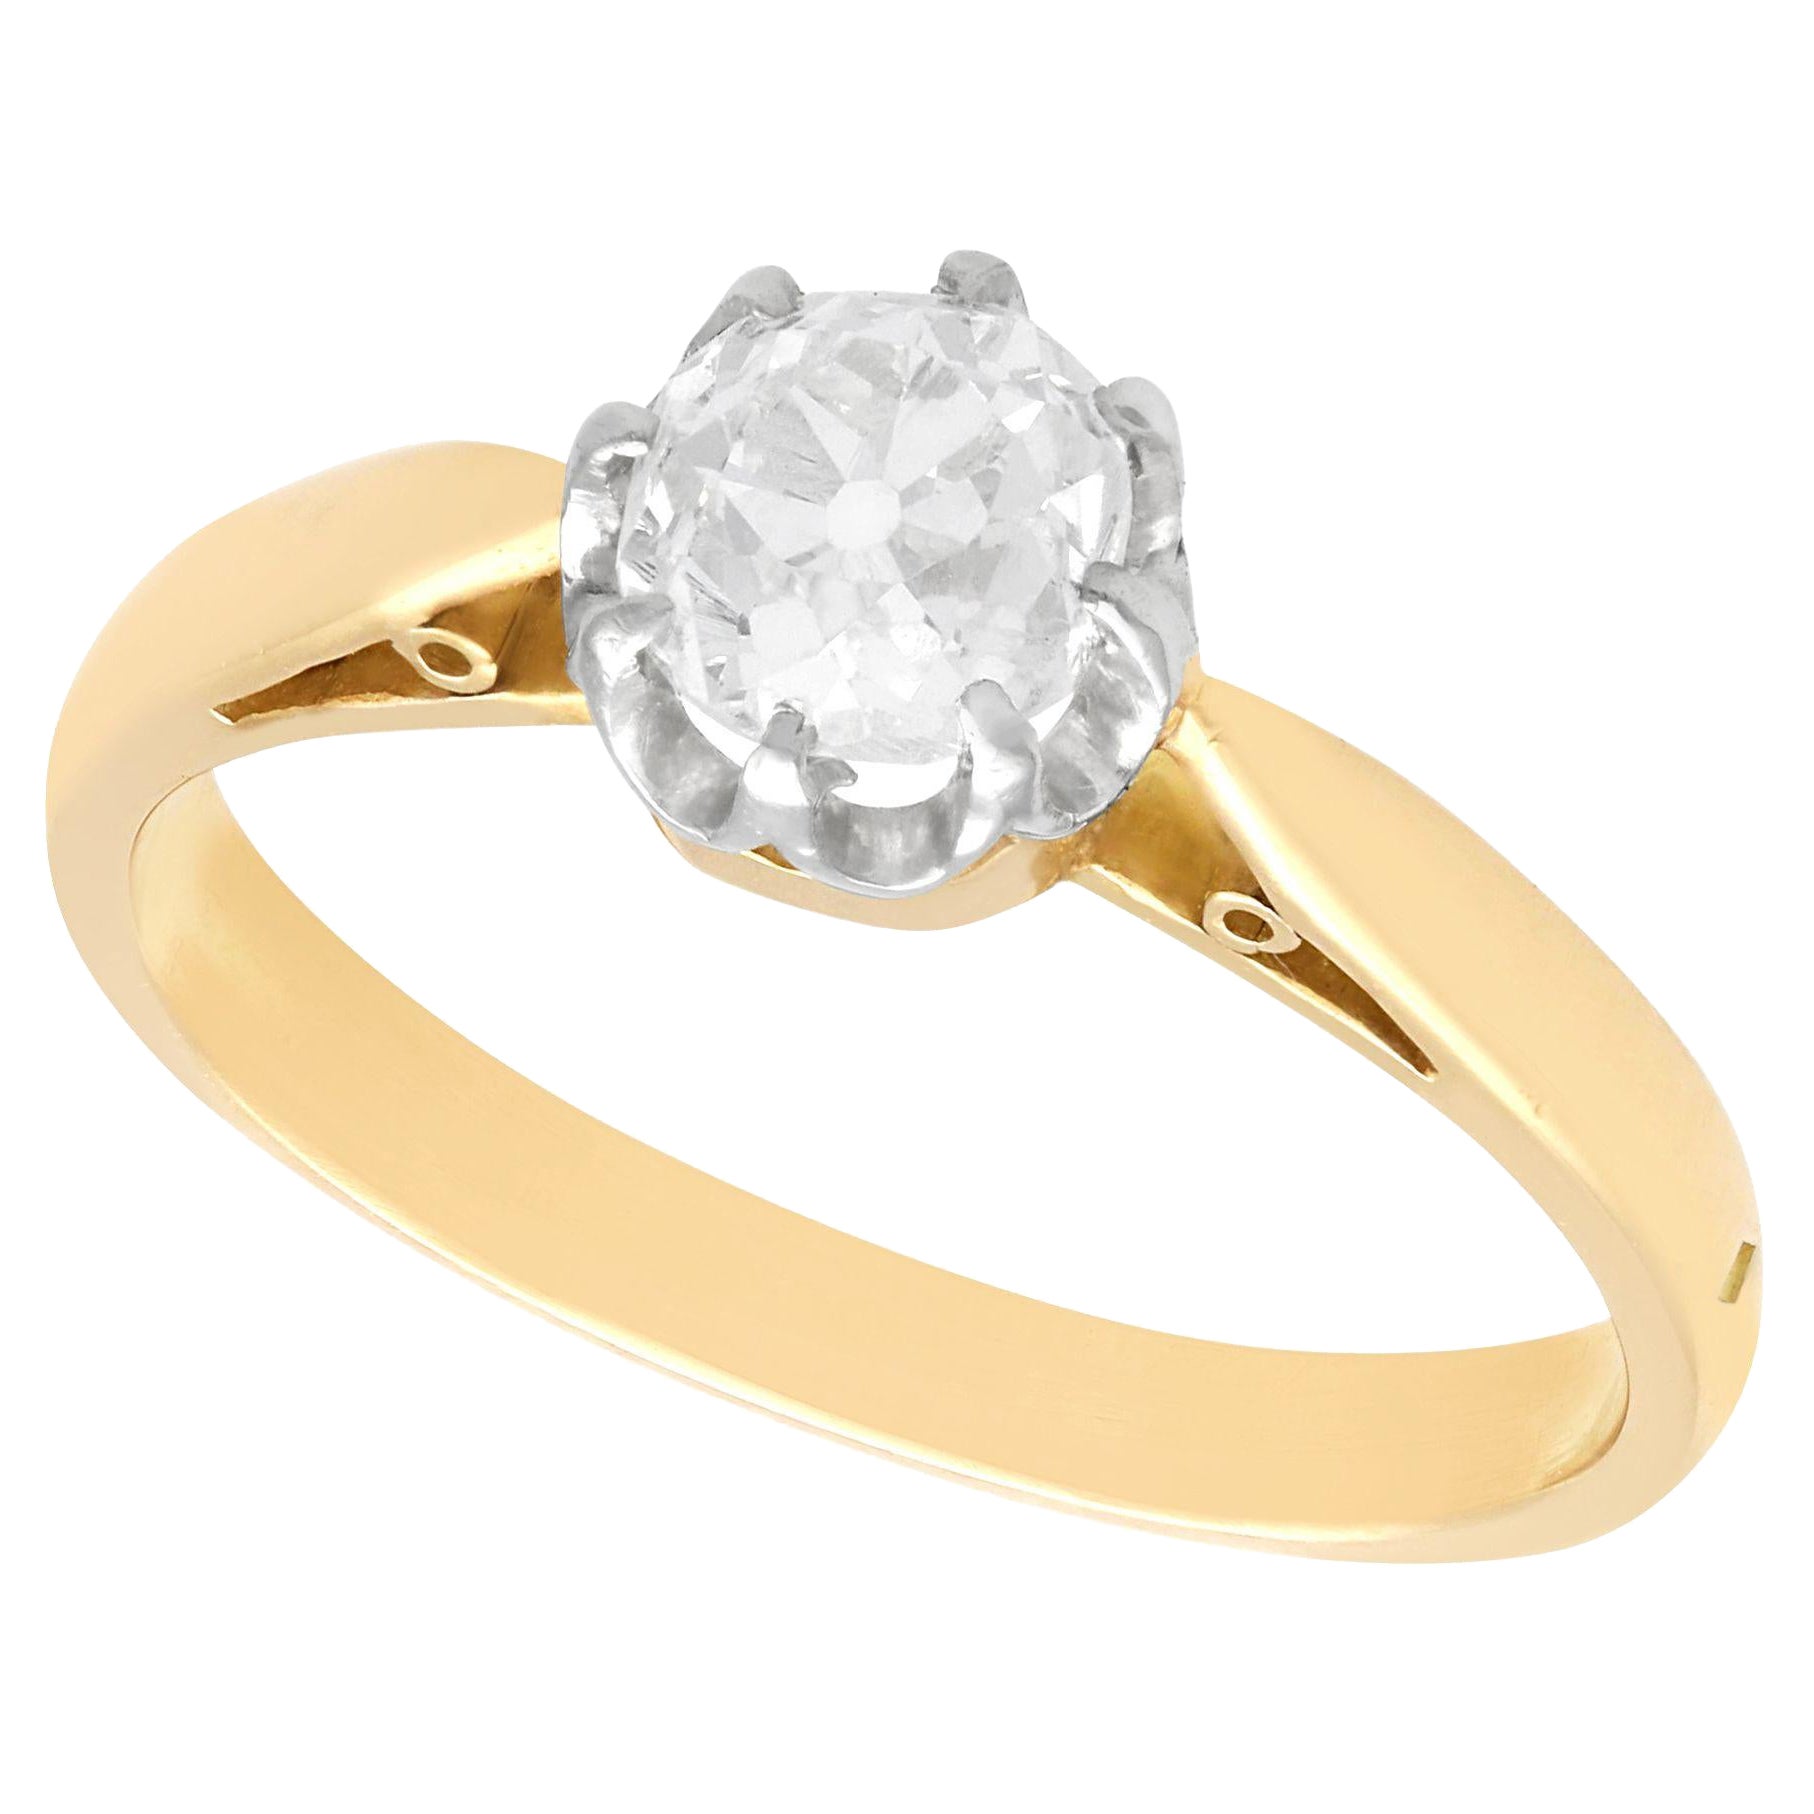 Antique 2.35 Carat Diamond and Yellow Gold Solitaire Ring, Circa 1900 ...